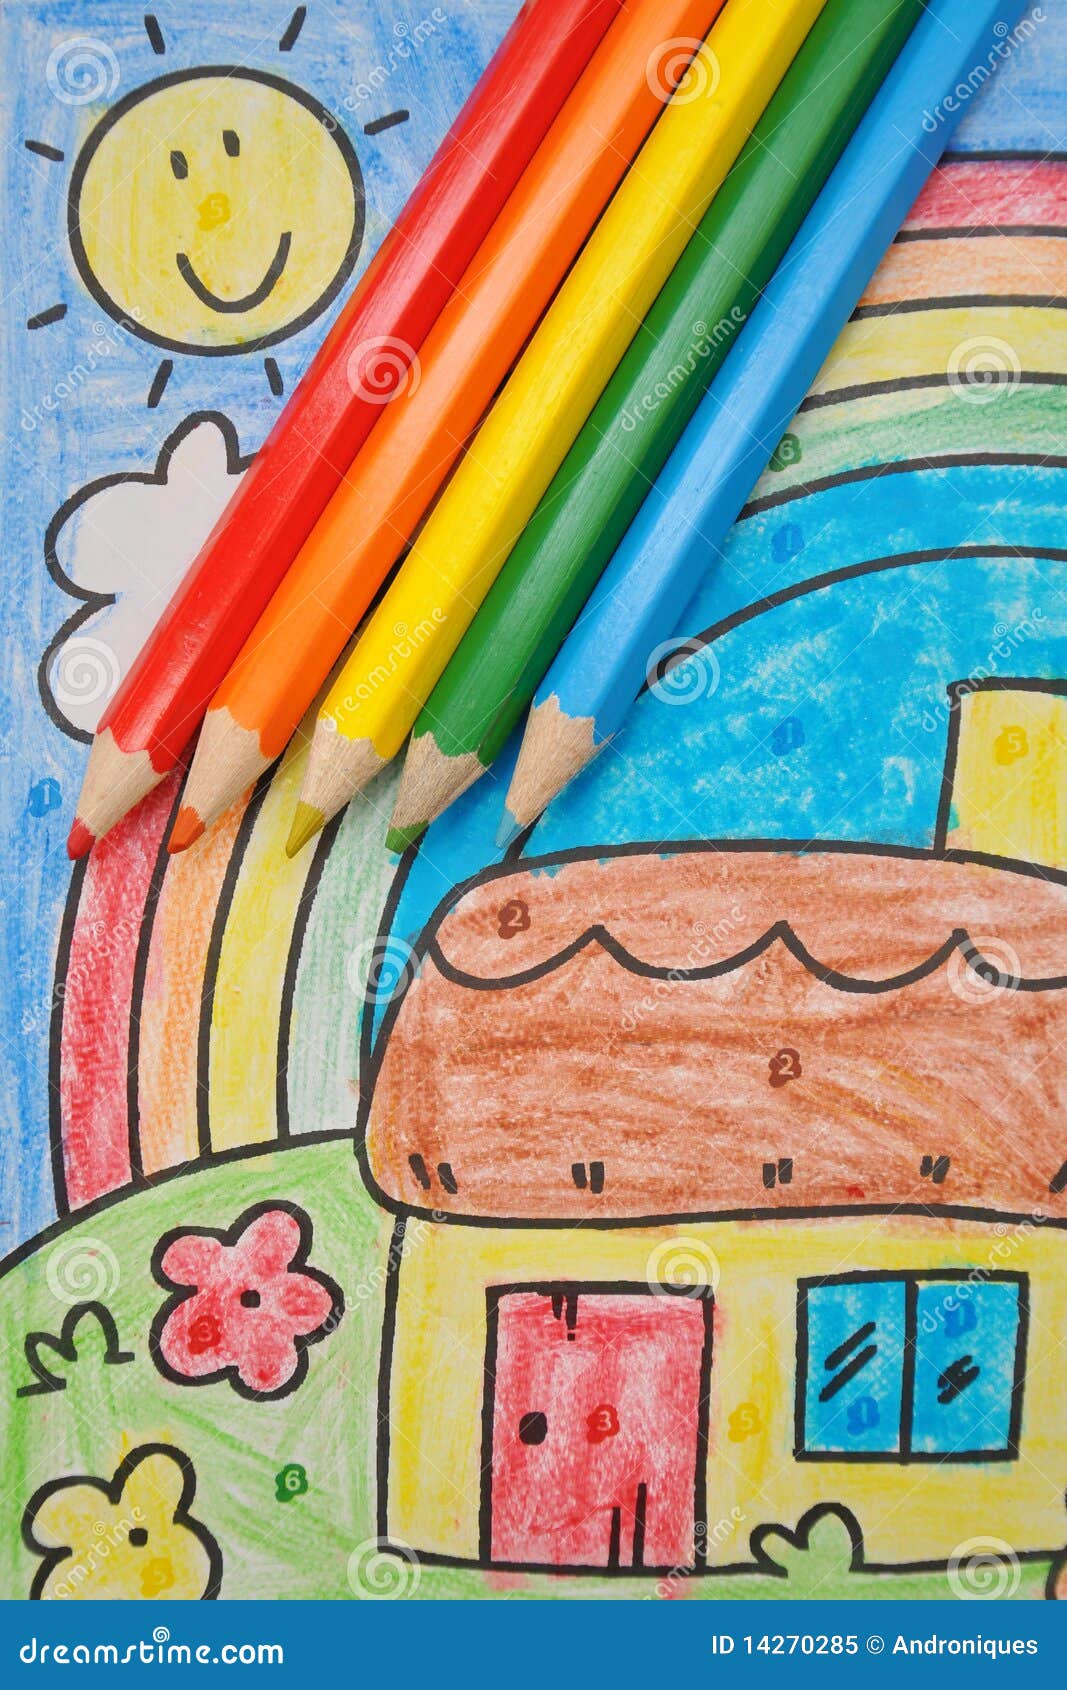 1,962 Children's Crayon Drawing Flower Royalty-Free Photos and Stock Images  | Shutterstock